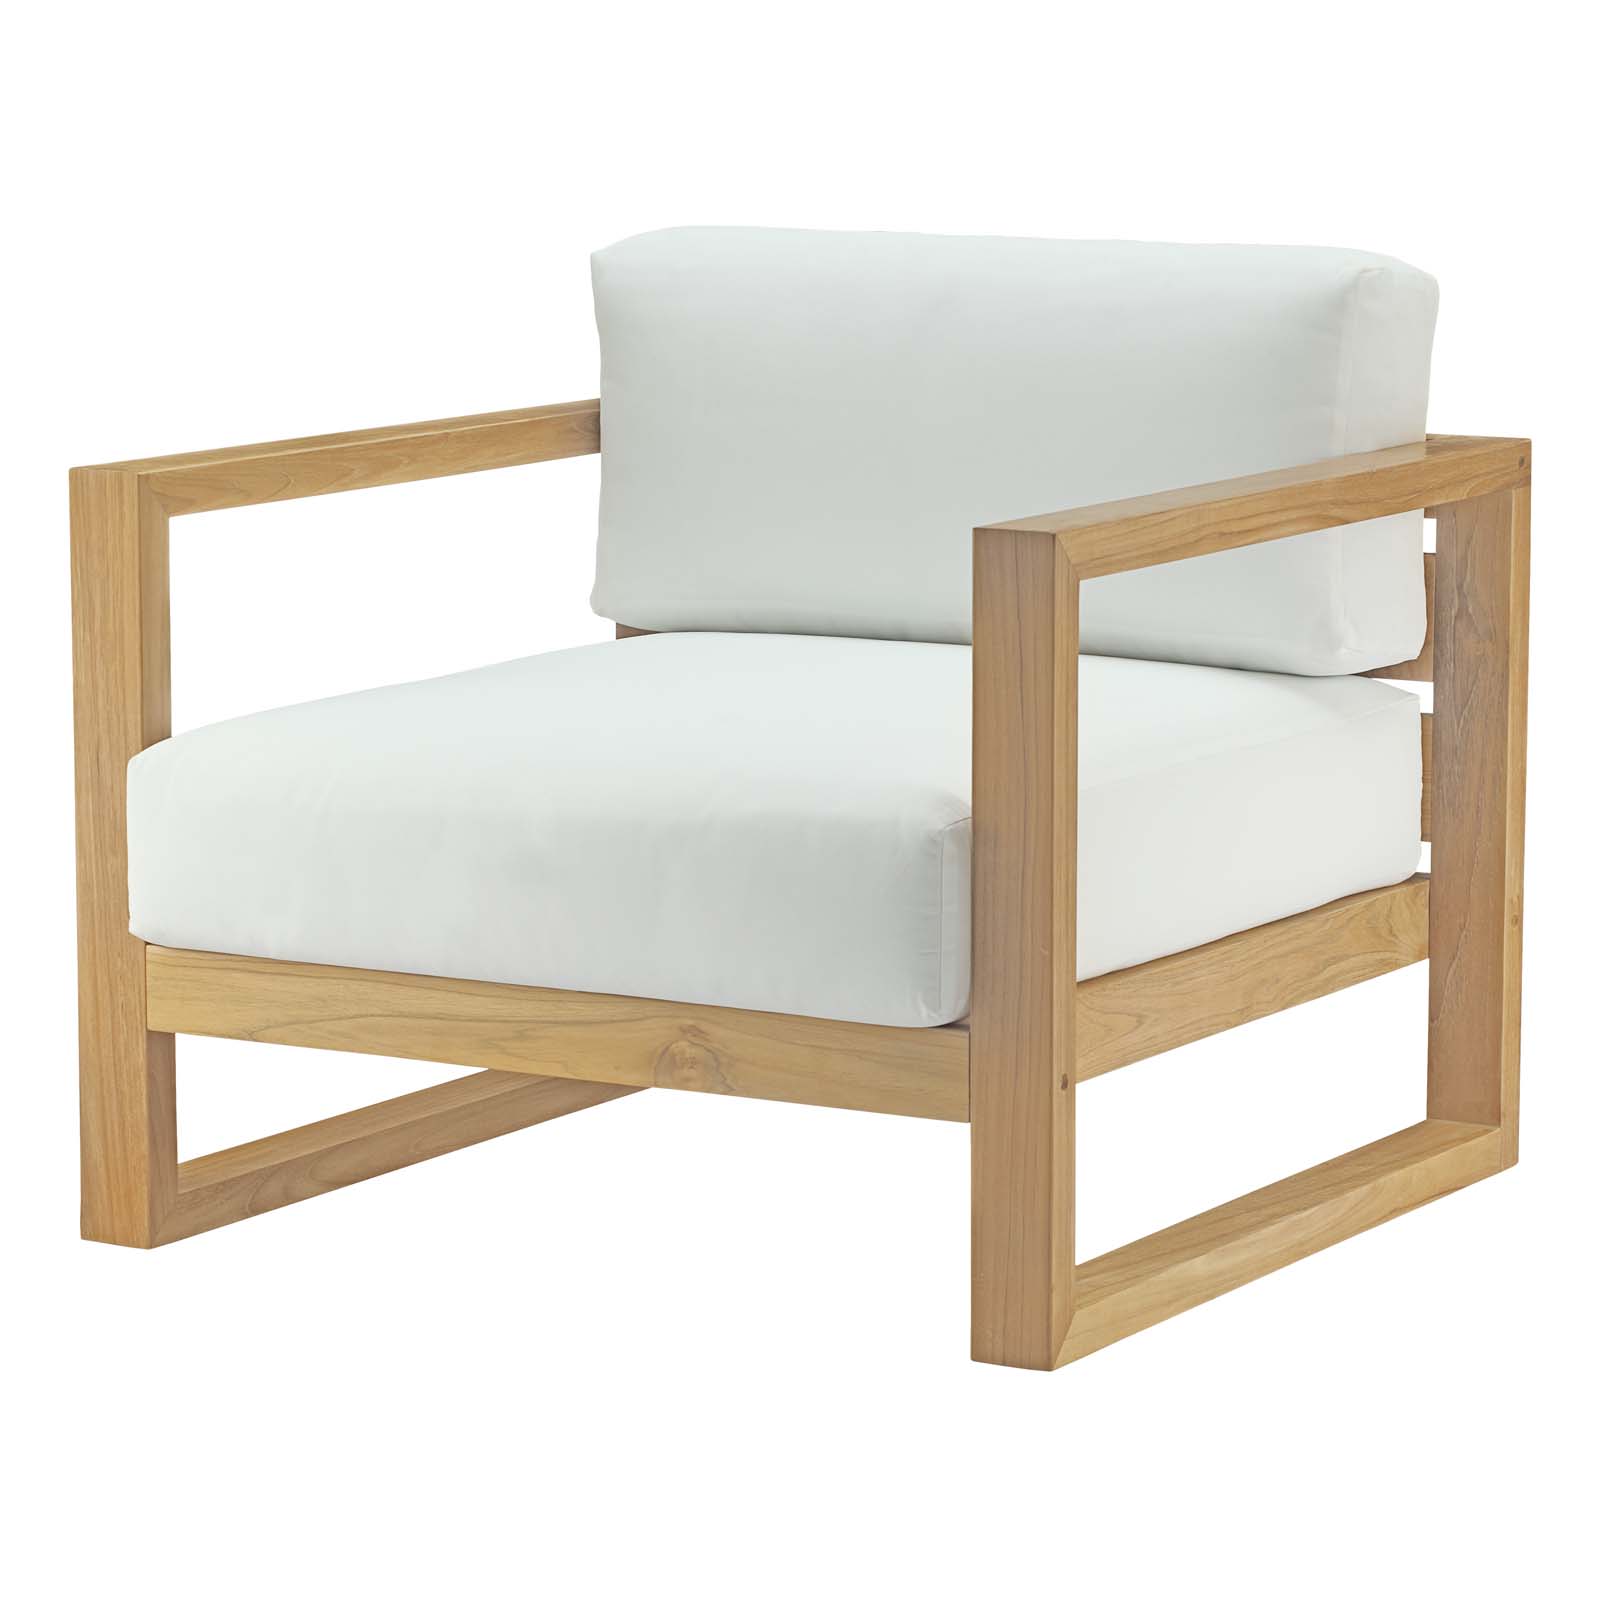 Modern Contemporary Urban Design Outdoor Patio Balcony Garden Furniture Lounge Chair and Side Table Set, Wood, White Natural - image 3 of 7